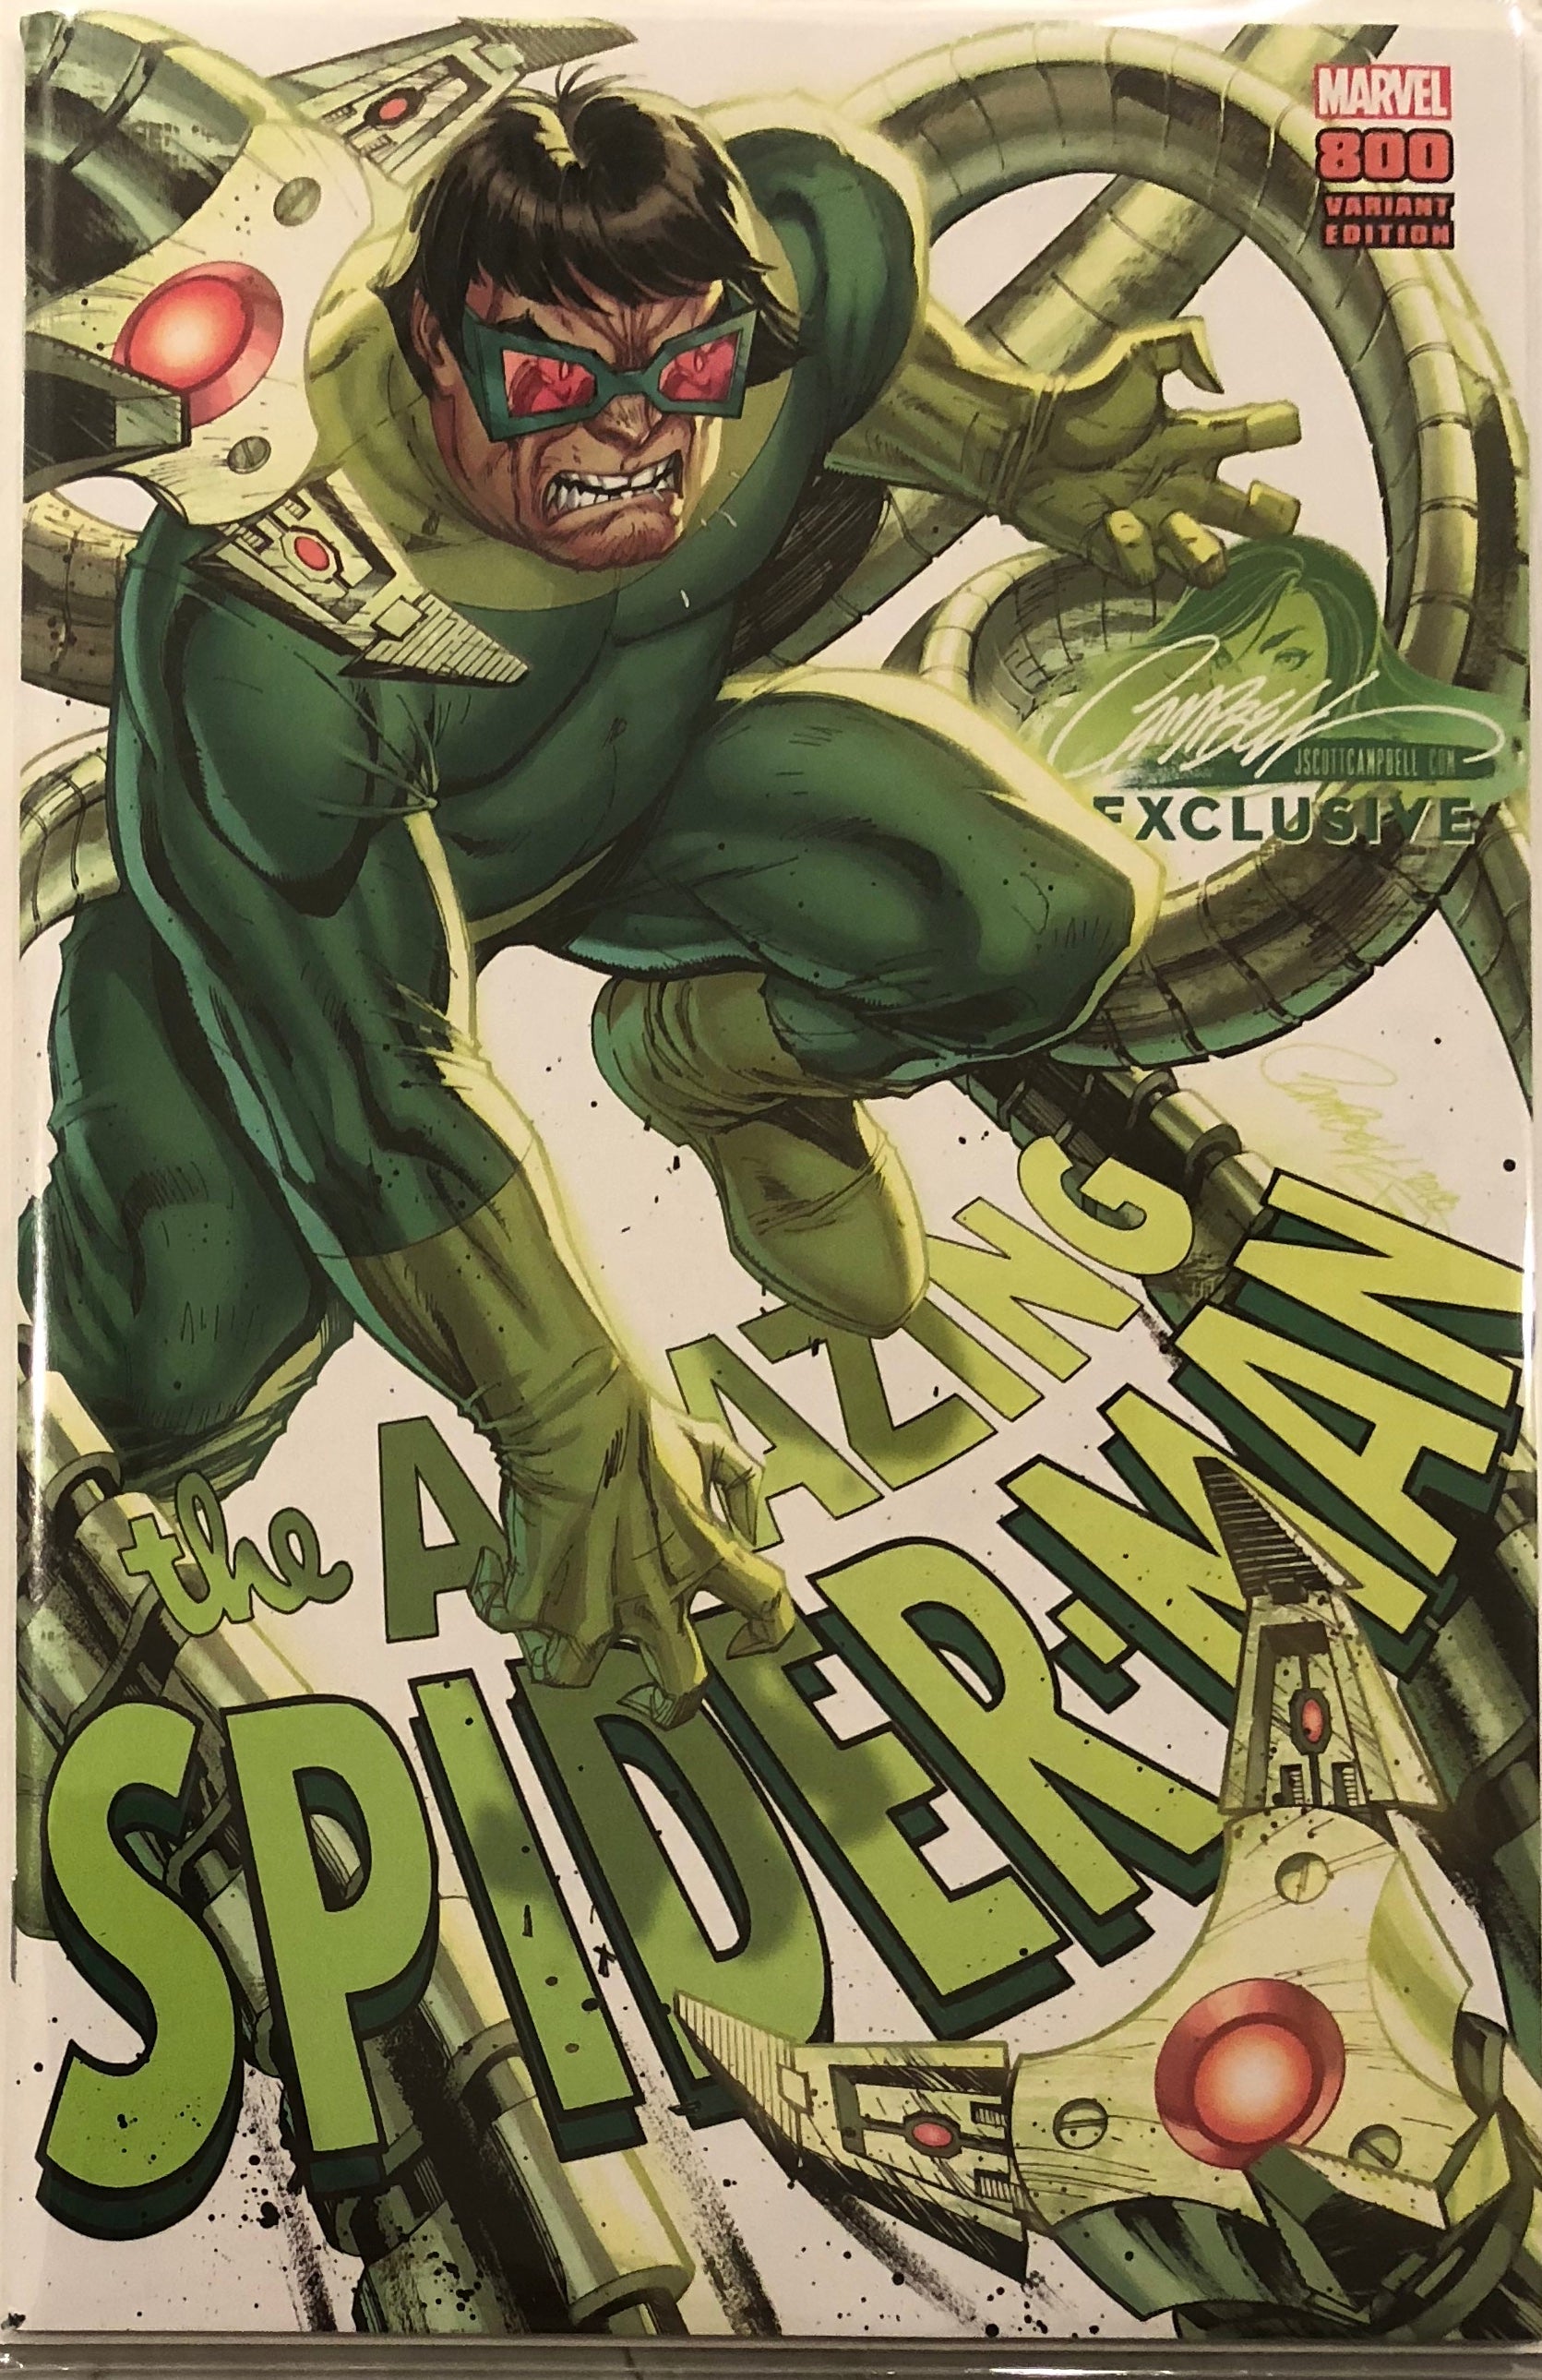 Amazing Spider-Man #800 J. Scott Campbell Edition G "Doctor Octopus" Exclusive